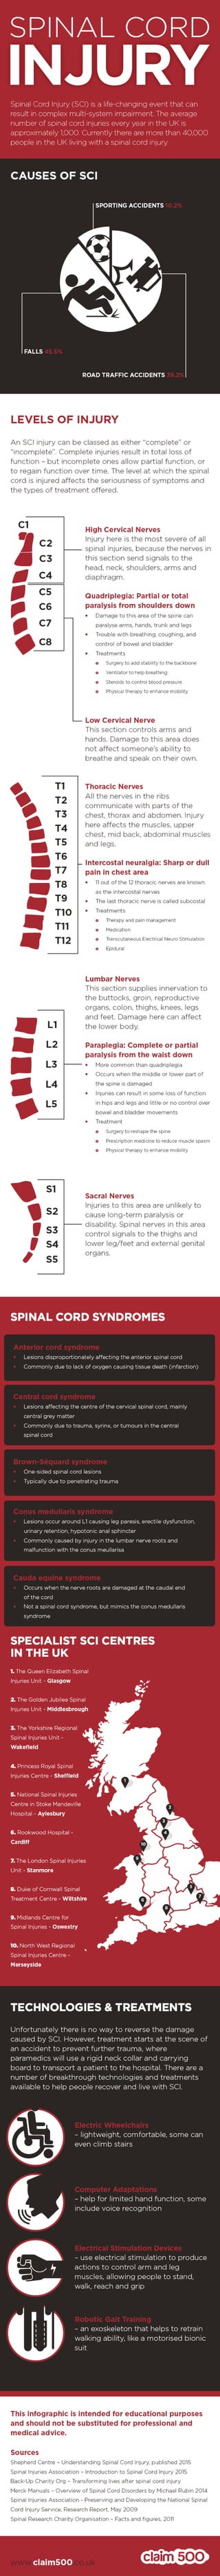 Spinal Cord Injury Infographic